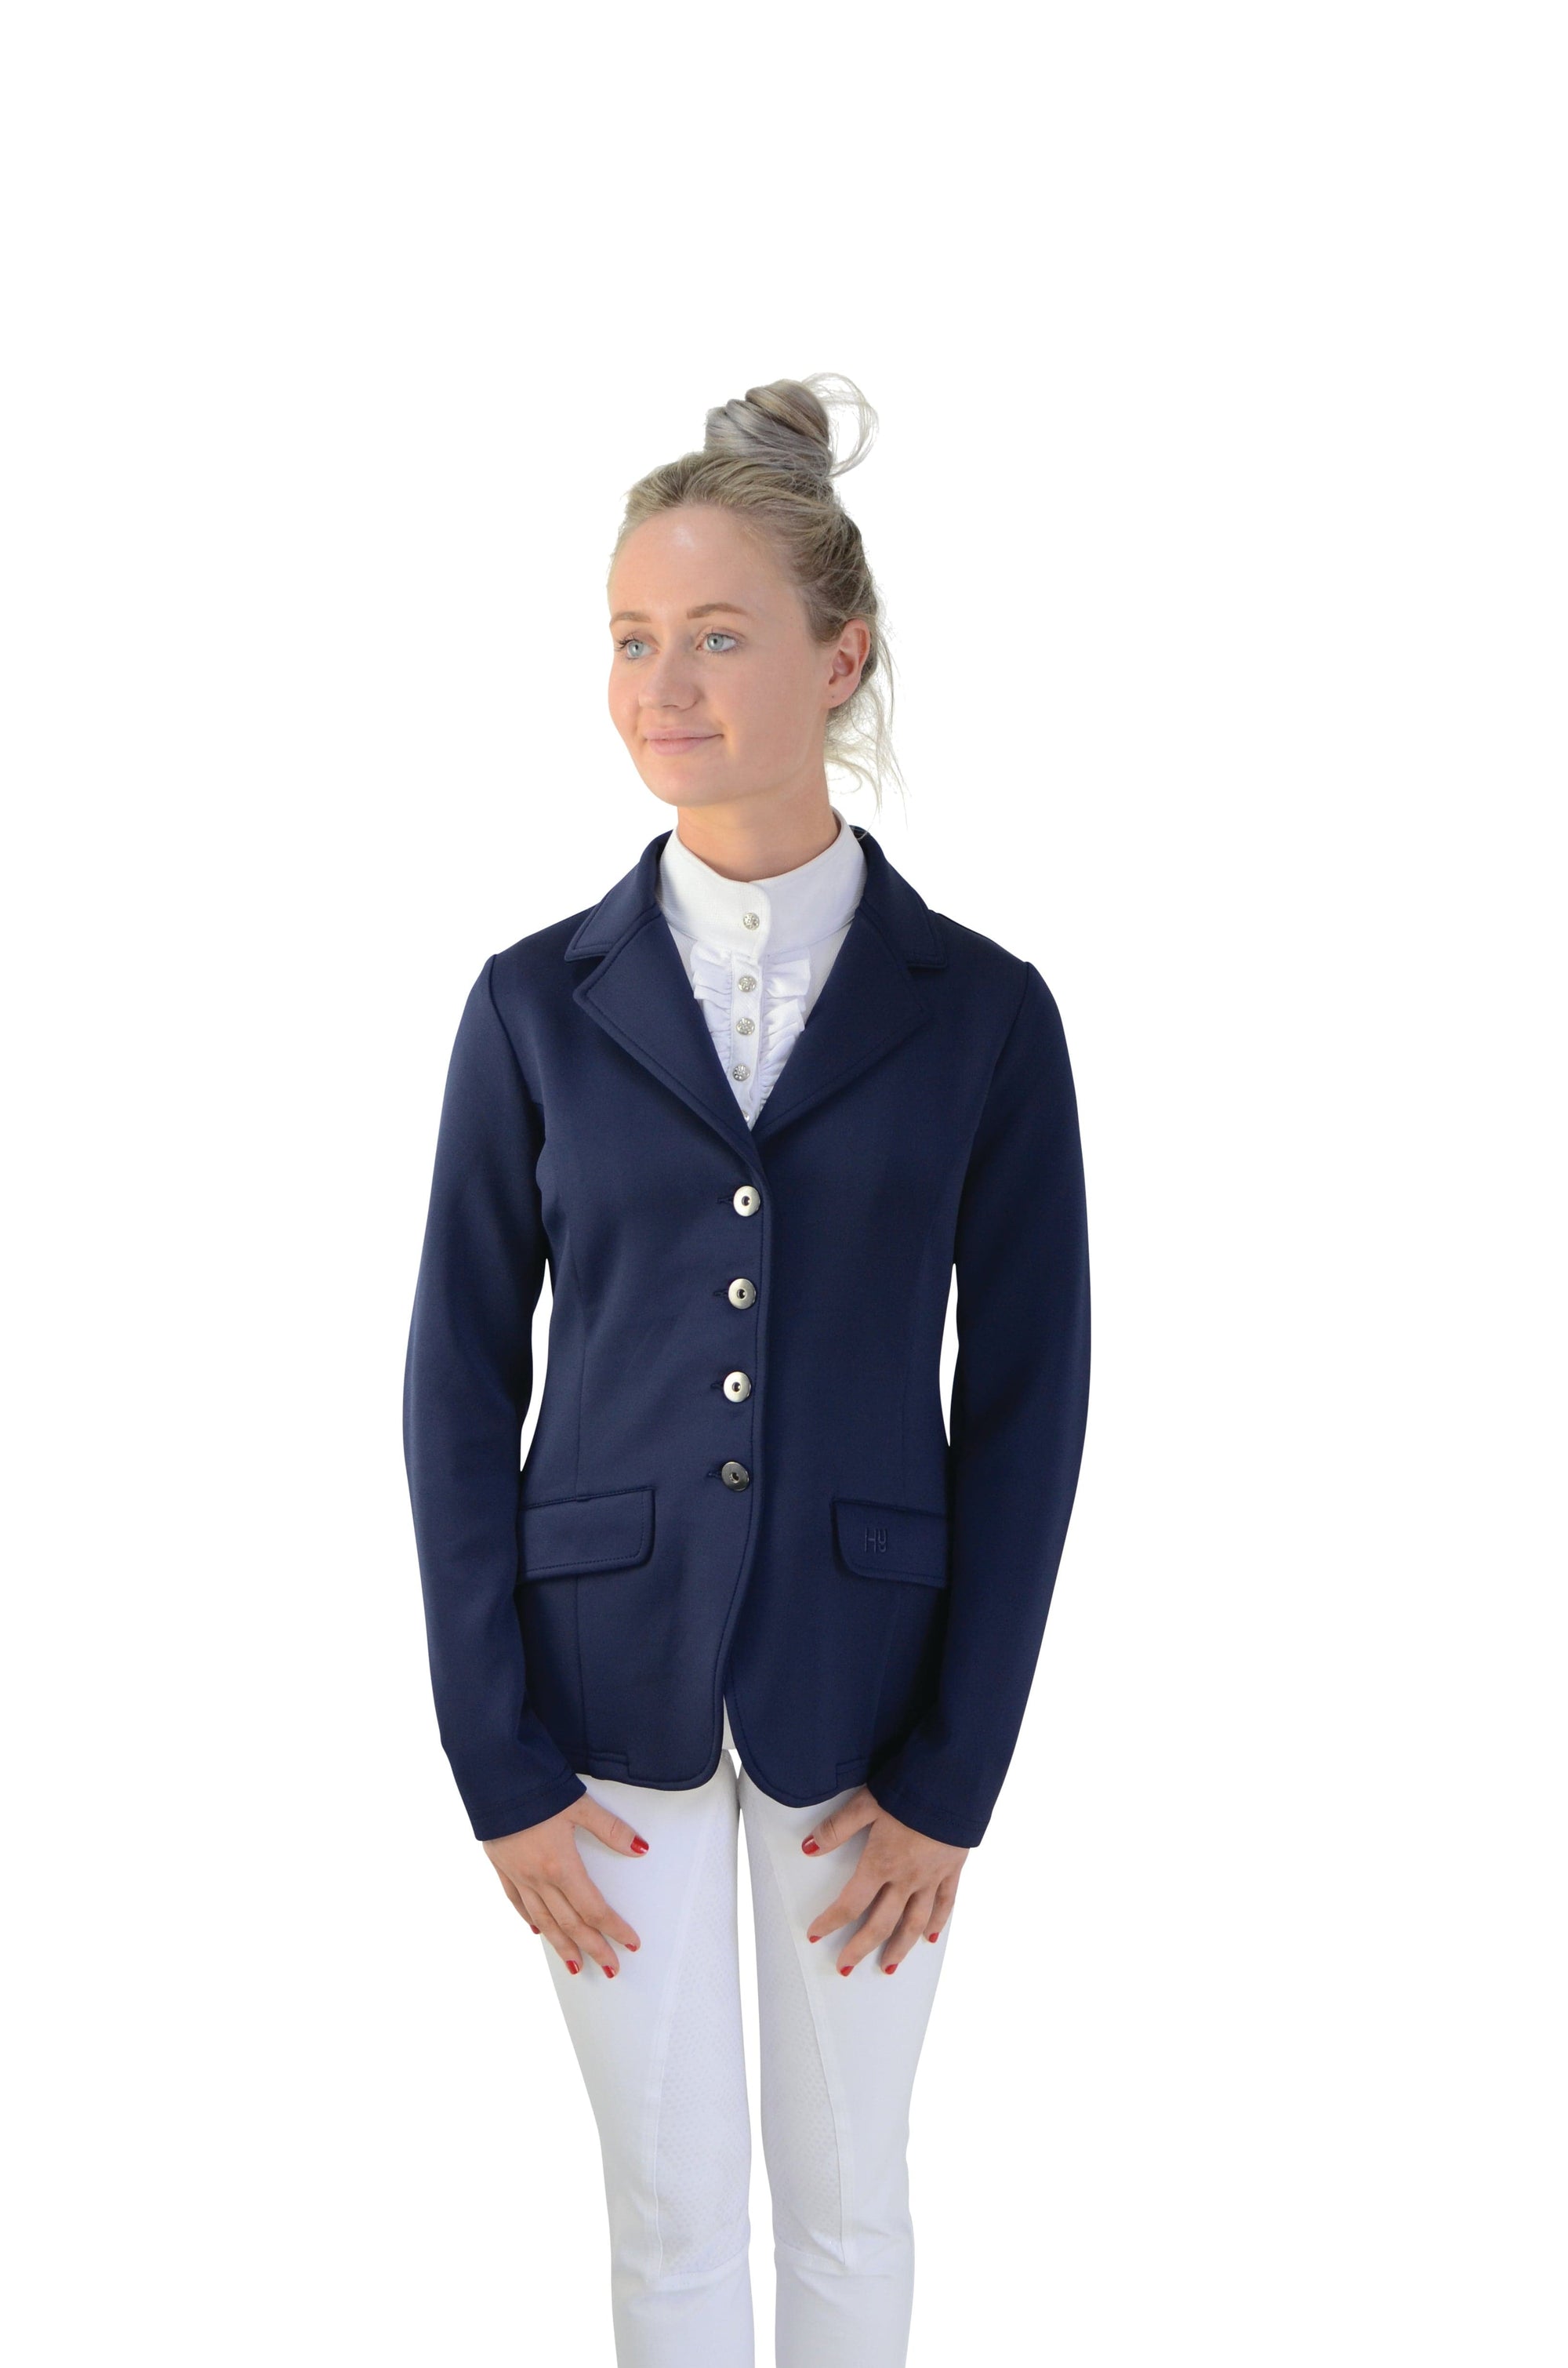 Hy equestrian stoneleigh ladies competition jacket